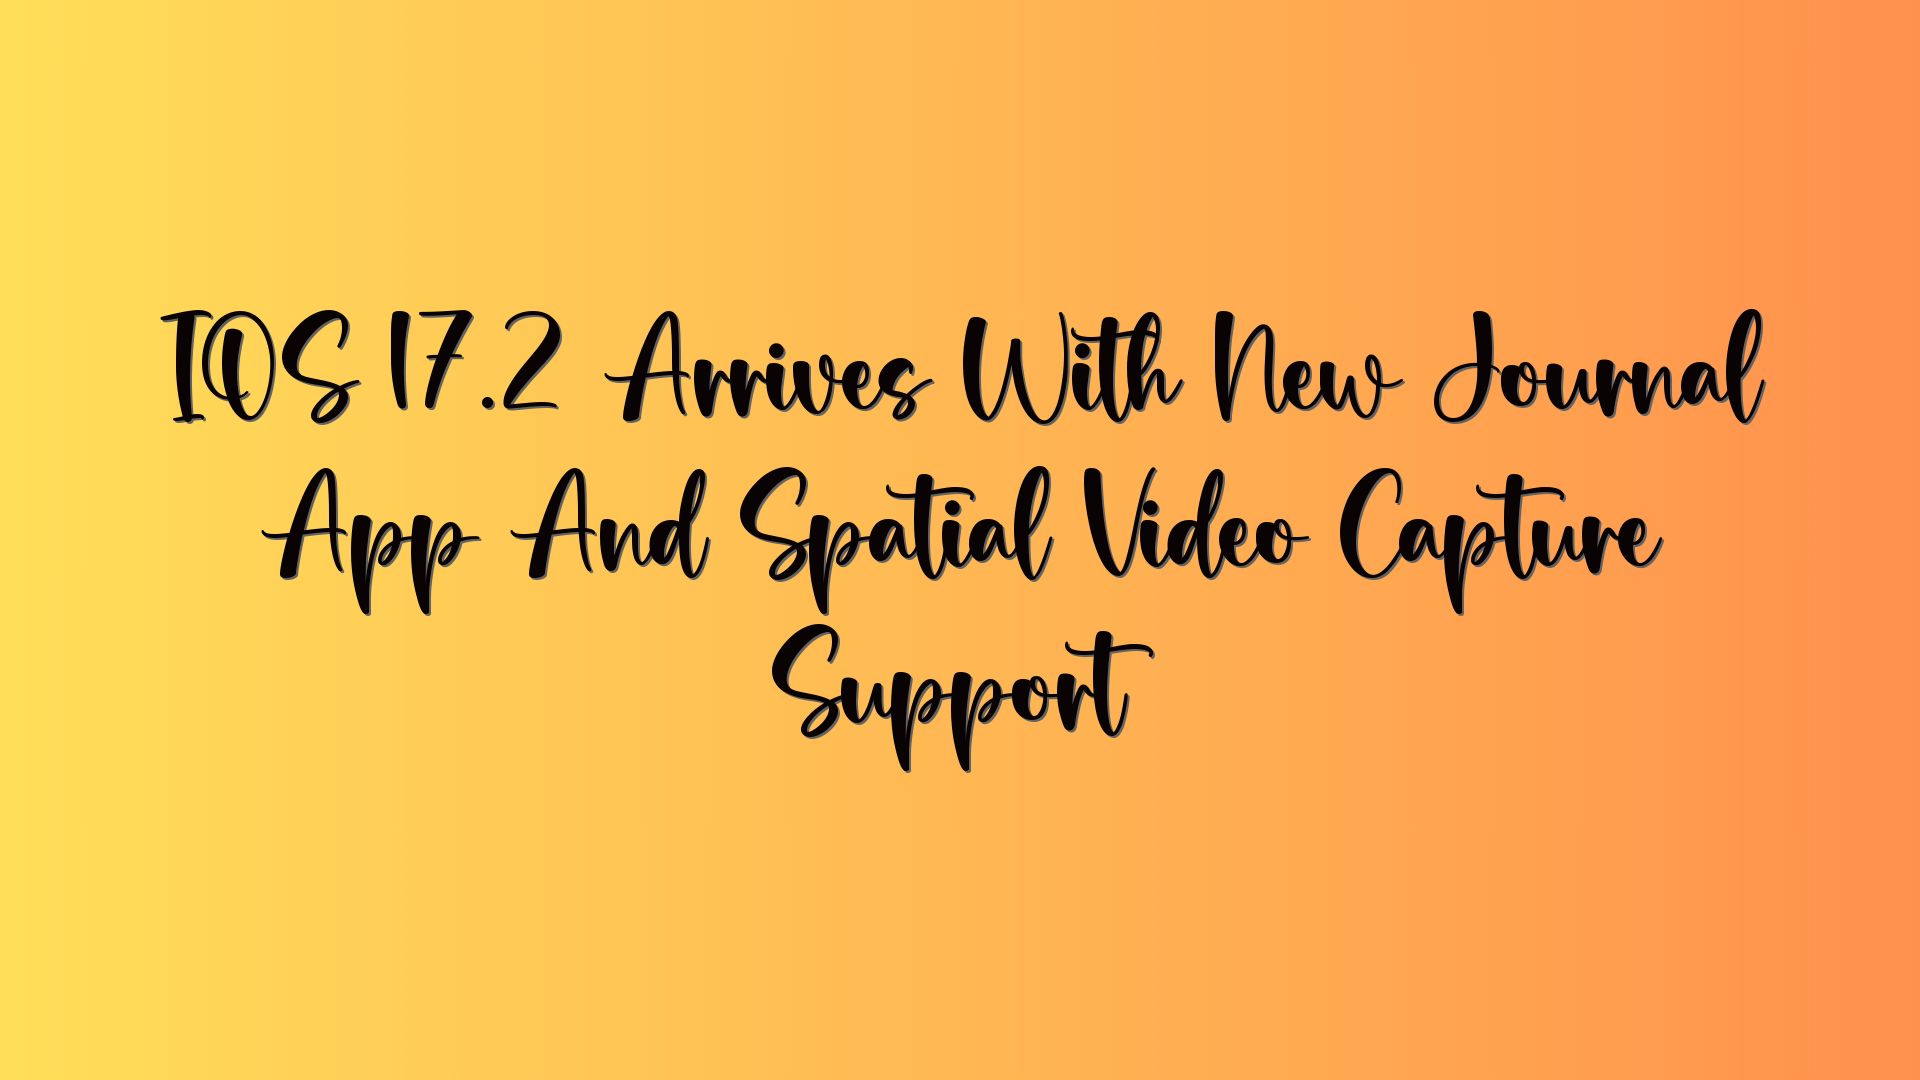 IOS 17.2 Arrives With New Journal App And Spatial Video Capture Support